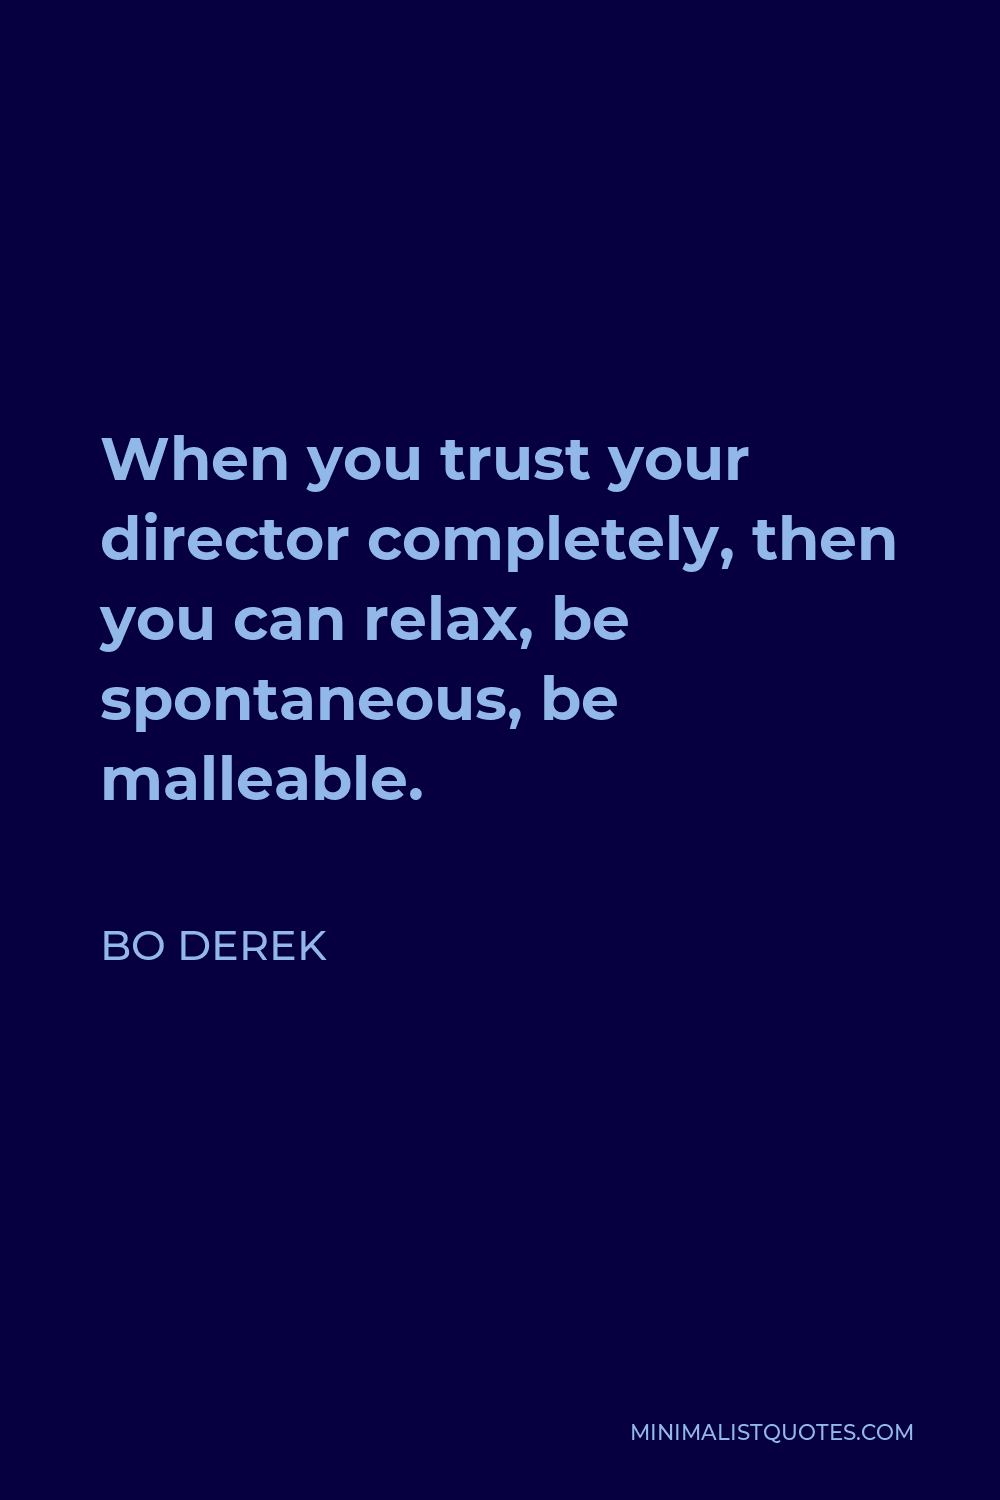 Bo Derek Quote - When you trust your director completely, then you can relax, be spontaneous, be malleable.